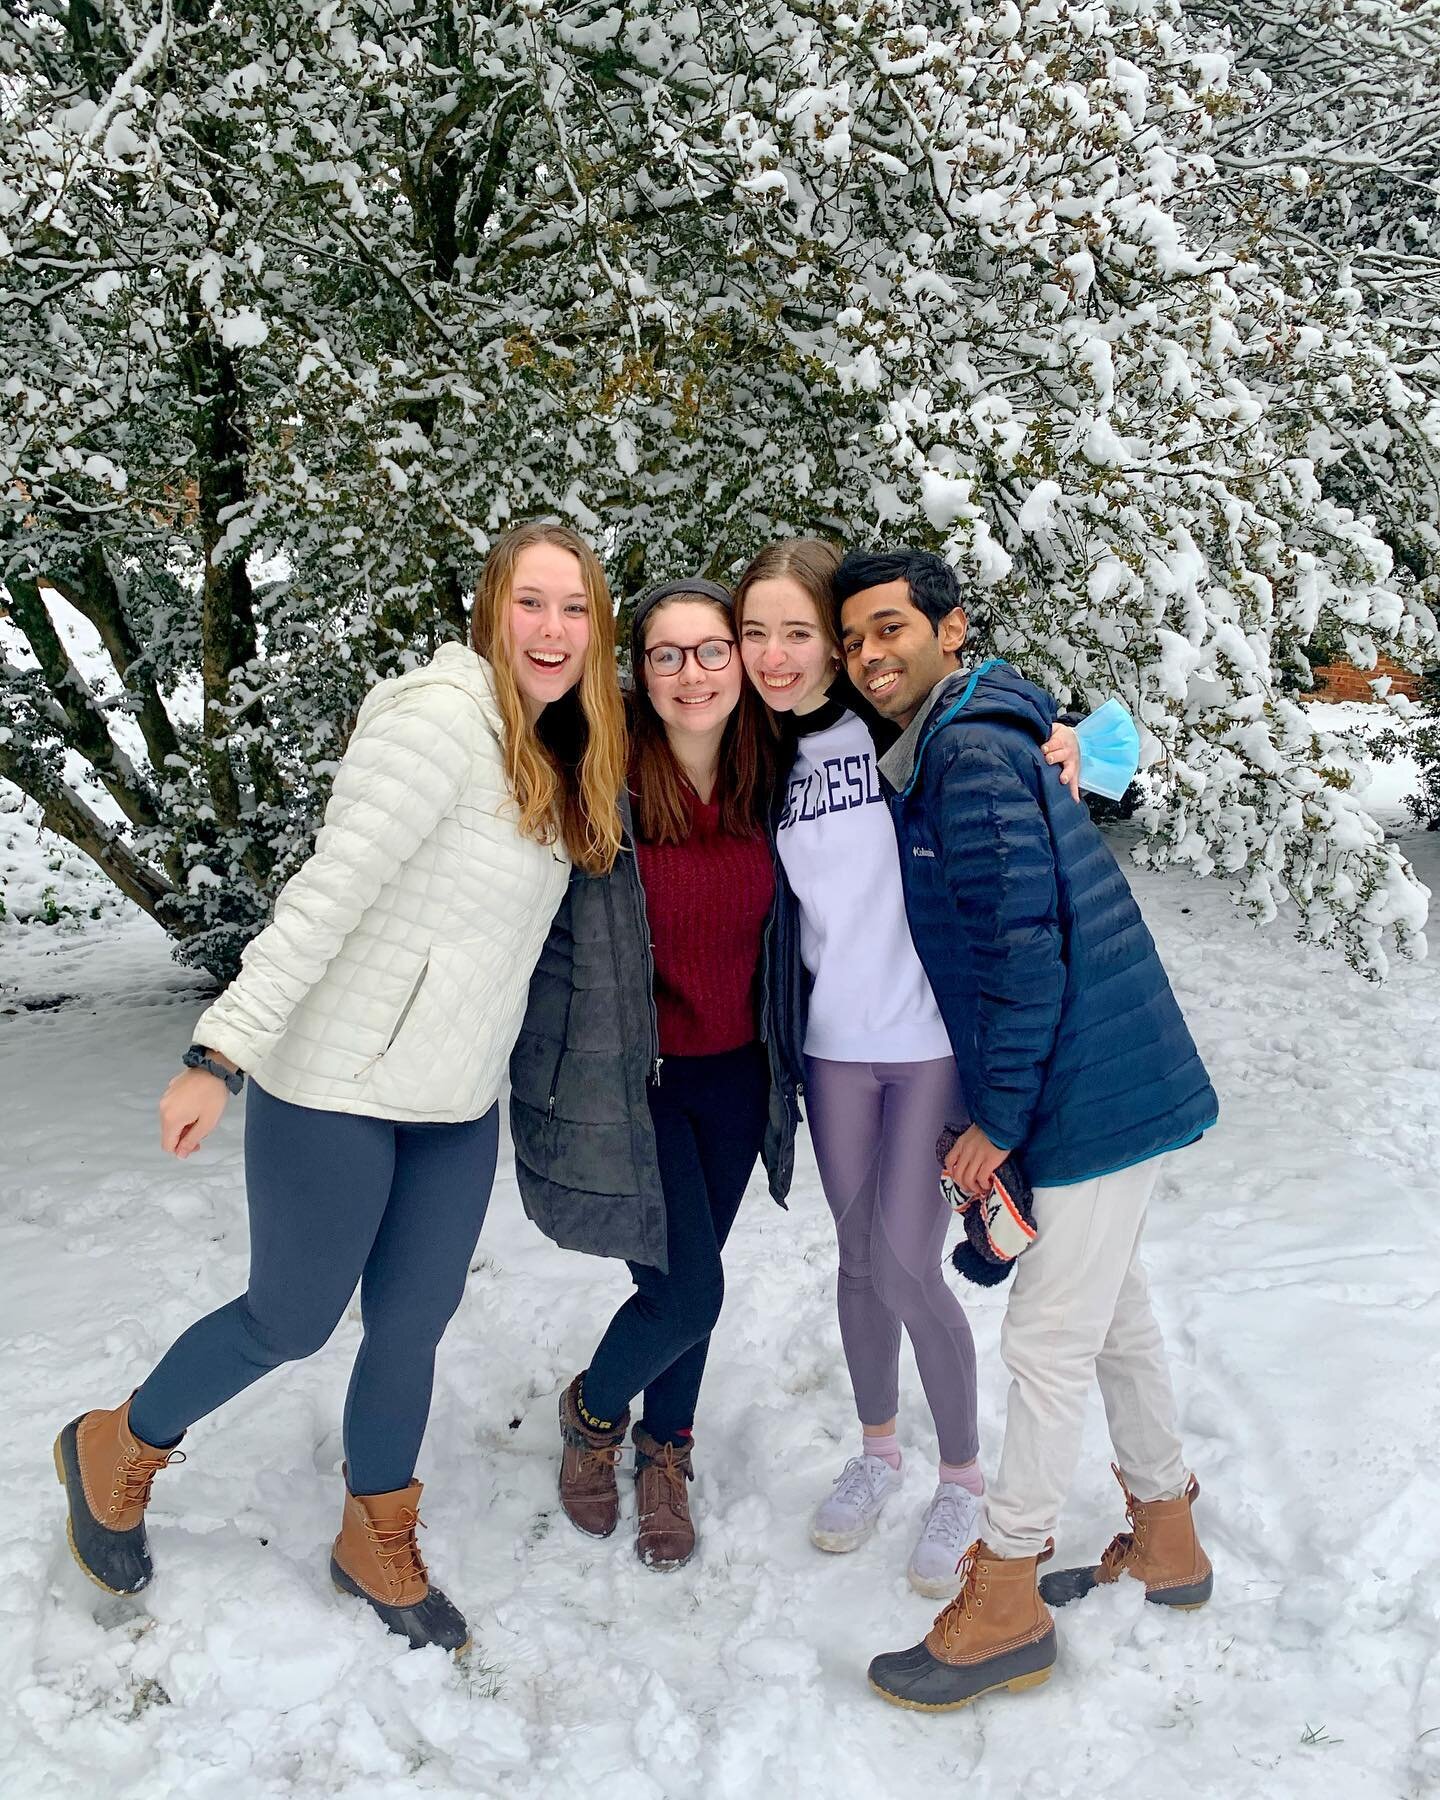 hello hello! my name is mahdin hossain and I&rsquo;ll be taking over the instagram today to show you a day in the life of a uva student and to answer any questions you have! i&rsquo;m a second year from charlottesville majoring in health equity &amp;